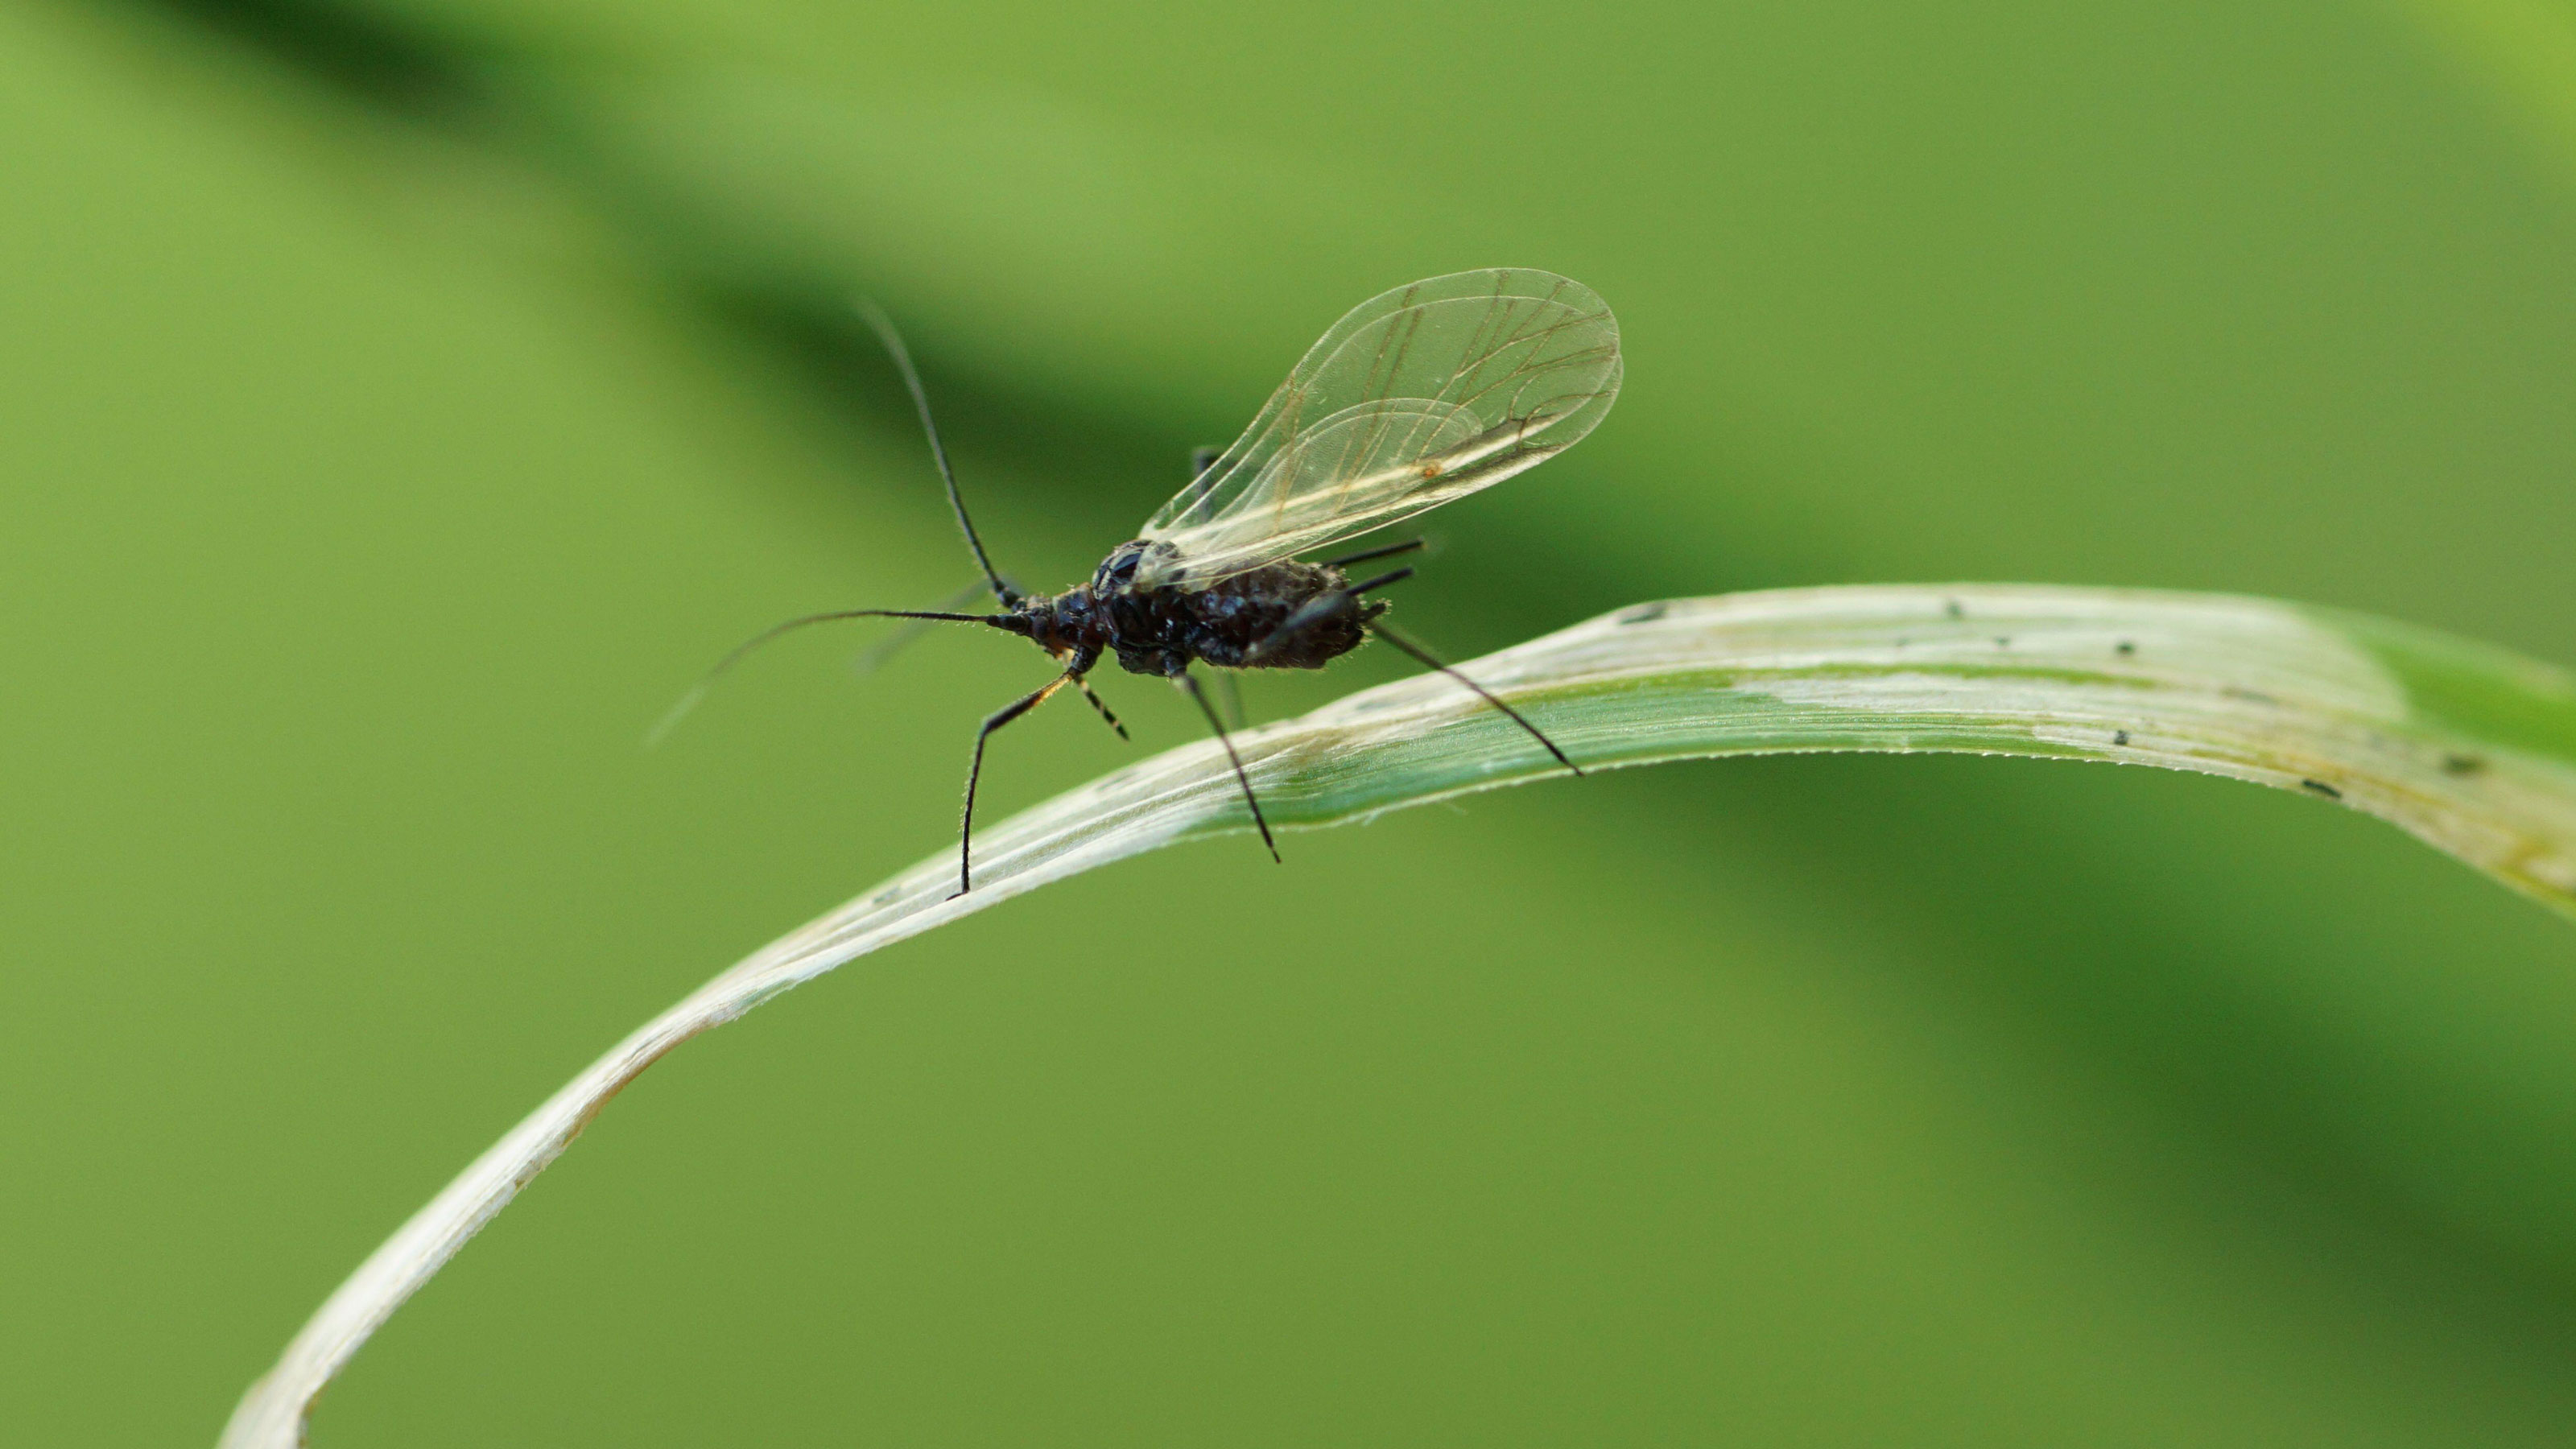 How to Get Rid of Gnats - The Best Household Remedy